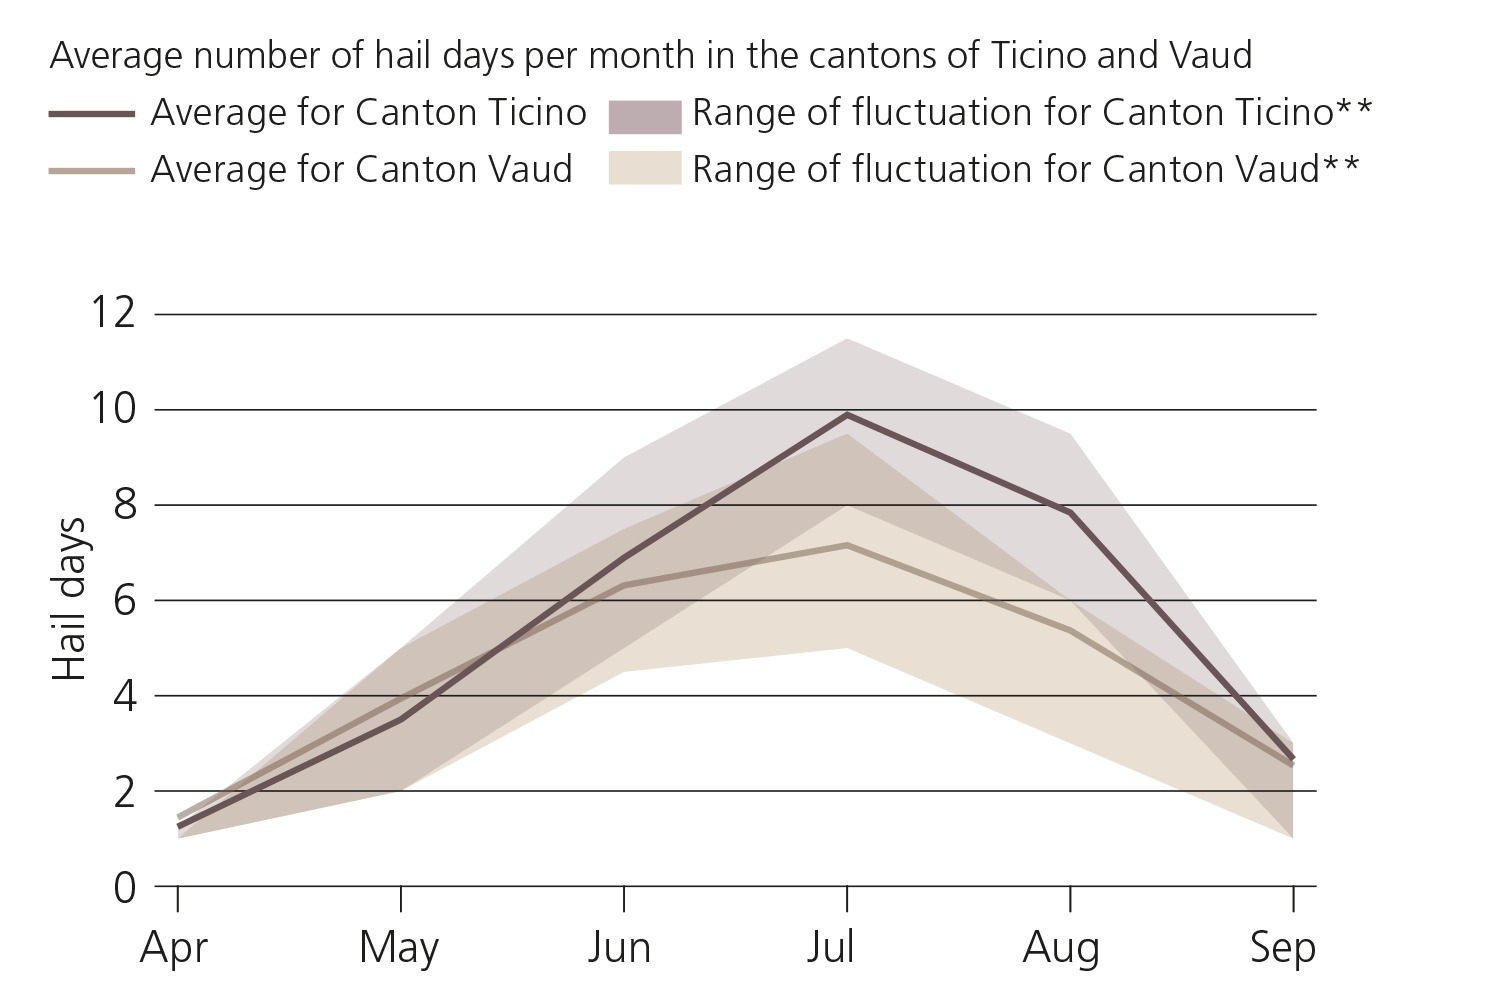 Average number of hail days per month in the cantons of Ticino and Vaud. The mean and the range of fluctuation show the annual cycle of hail days.